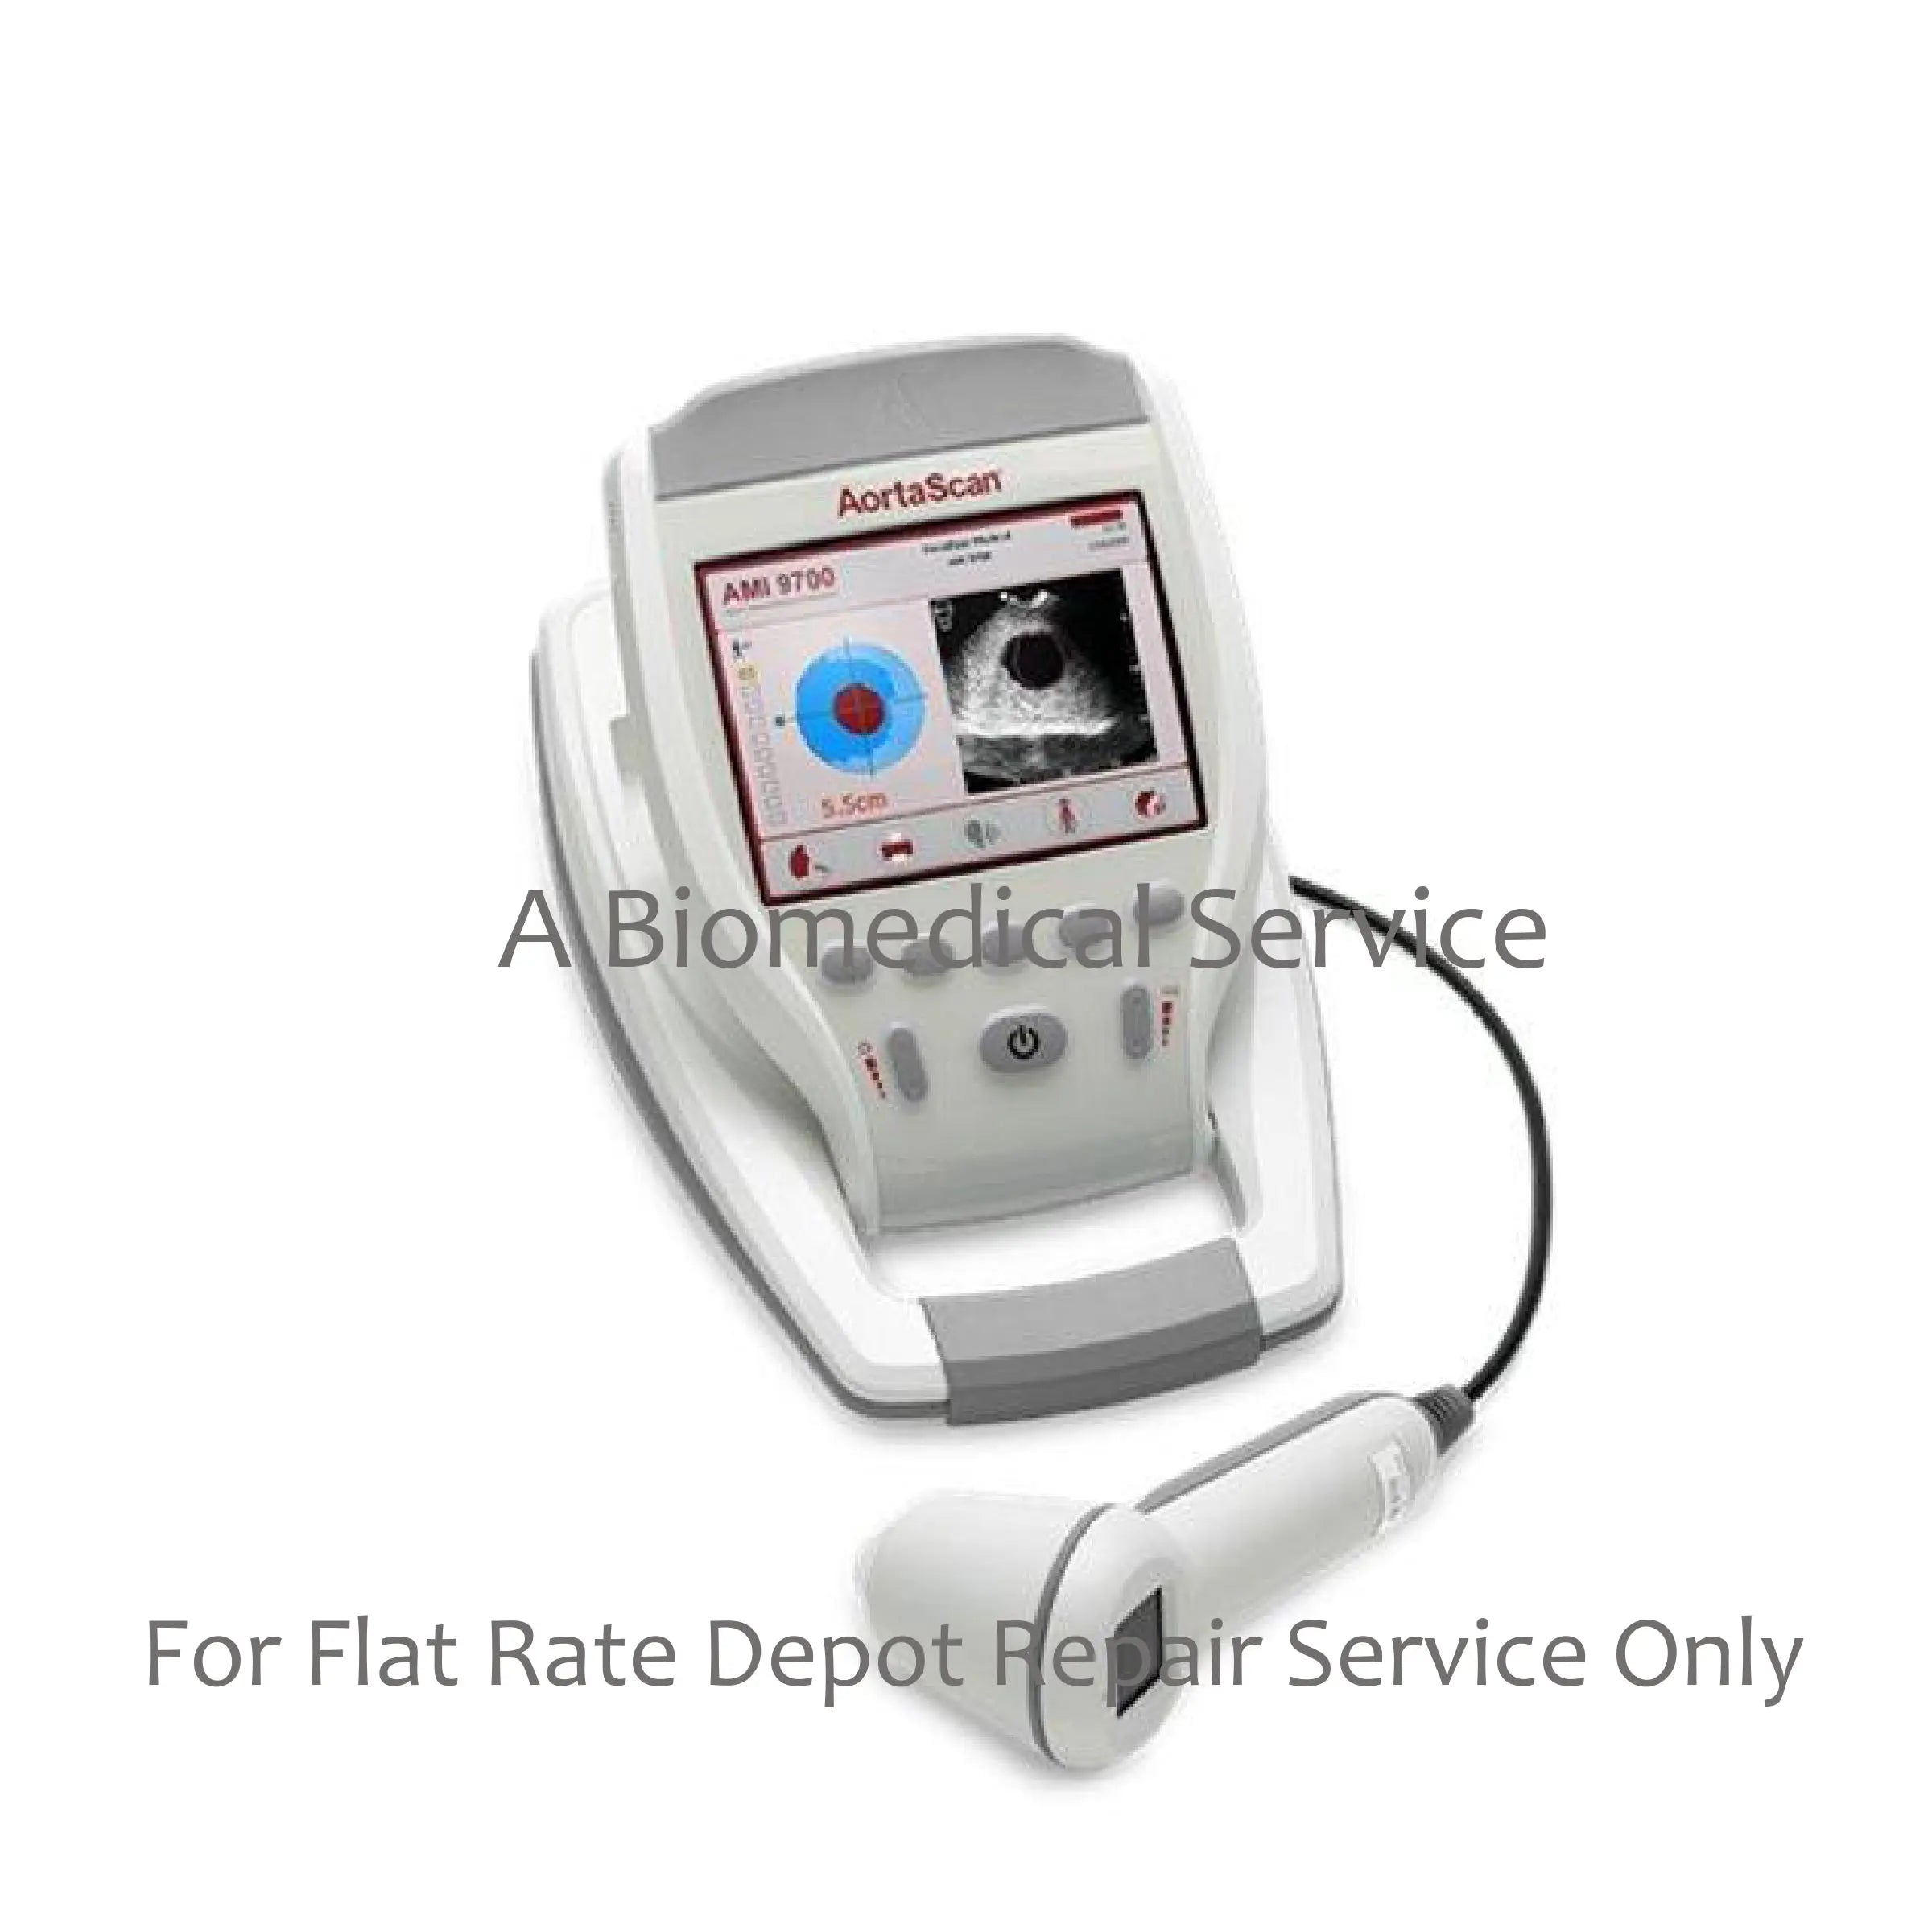 Load image into Gallery viewer, A Biomedical Service AortaScan AMI 9700 Repair Service 2450.00